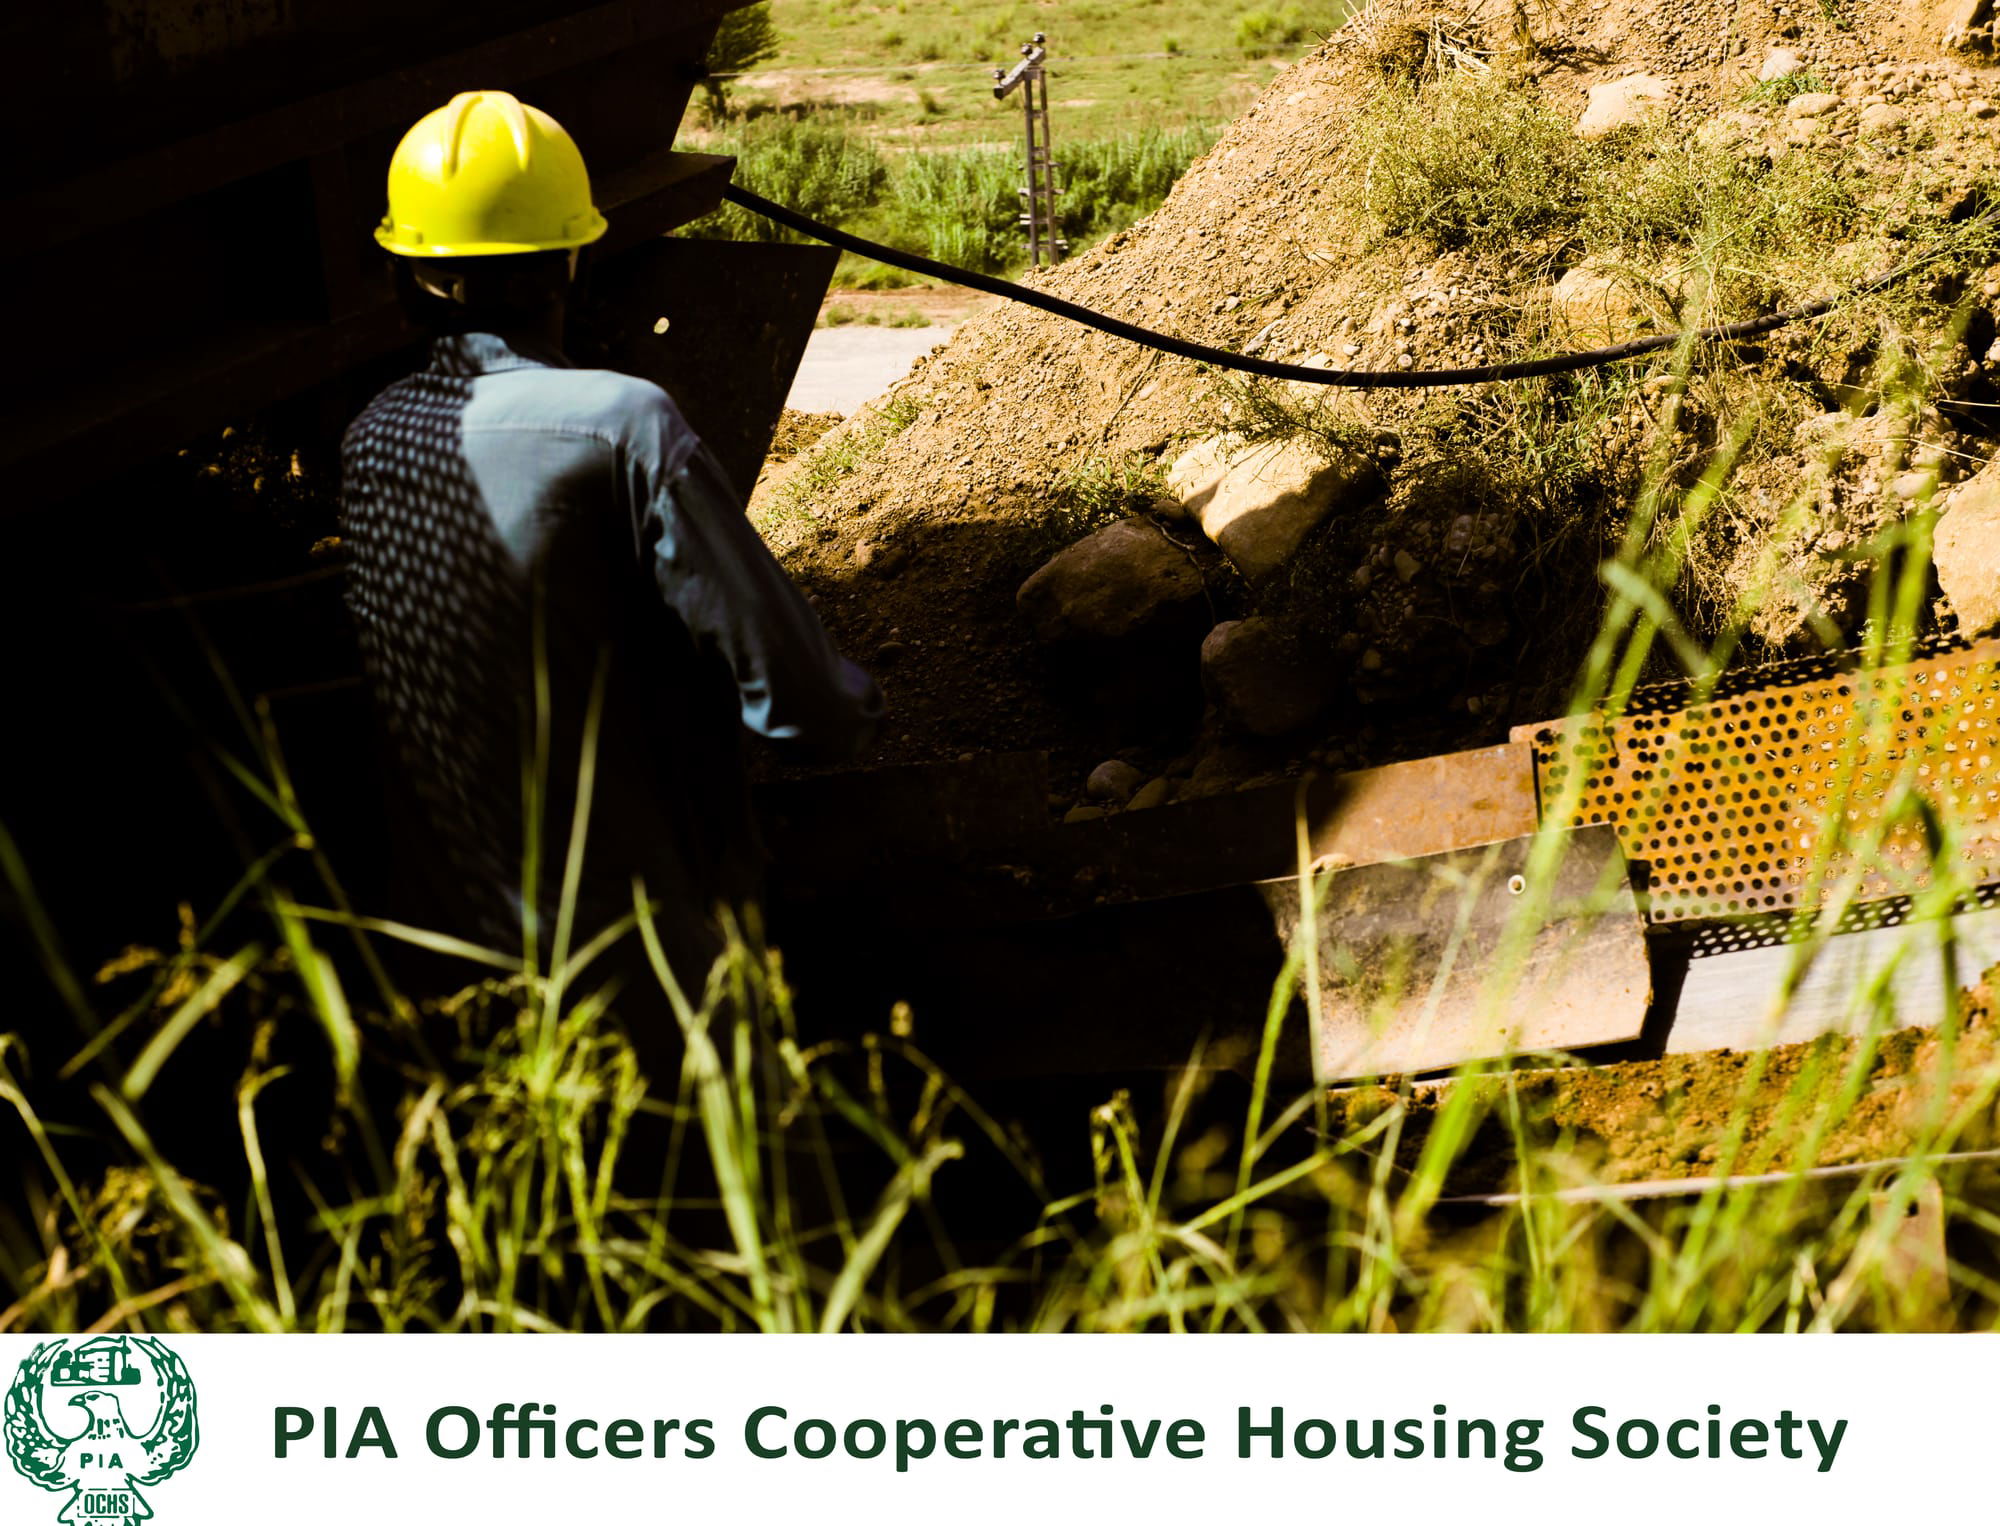 PIA Officers Cooperative Housing Society